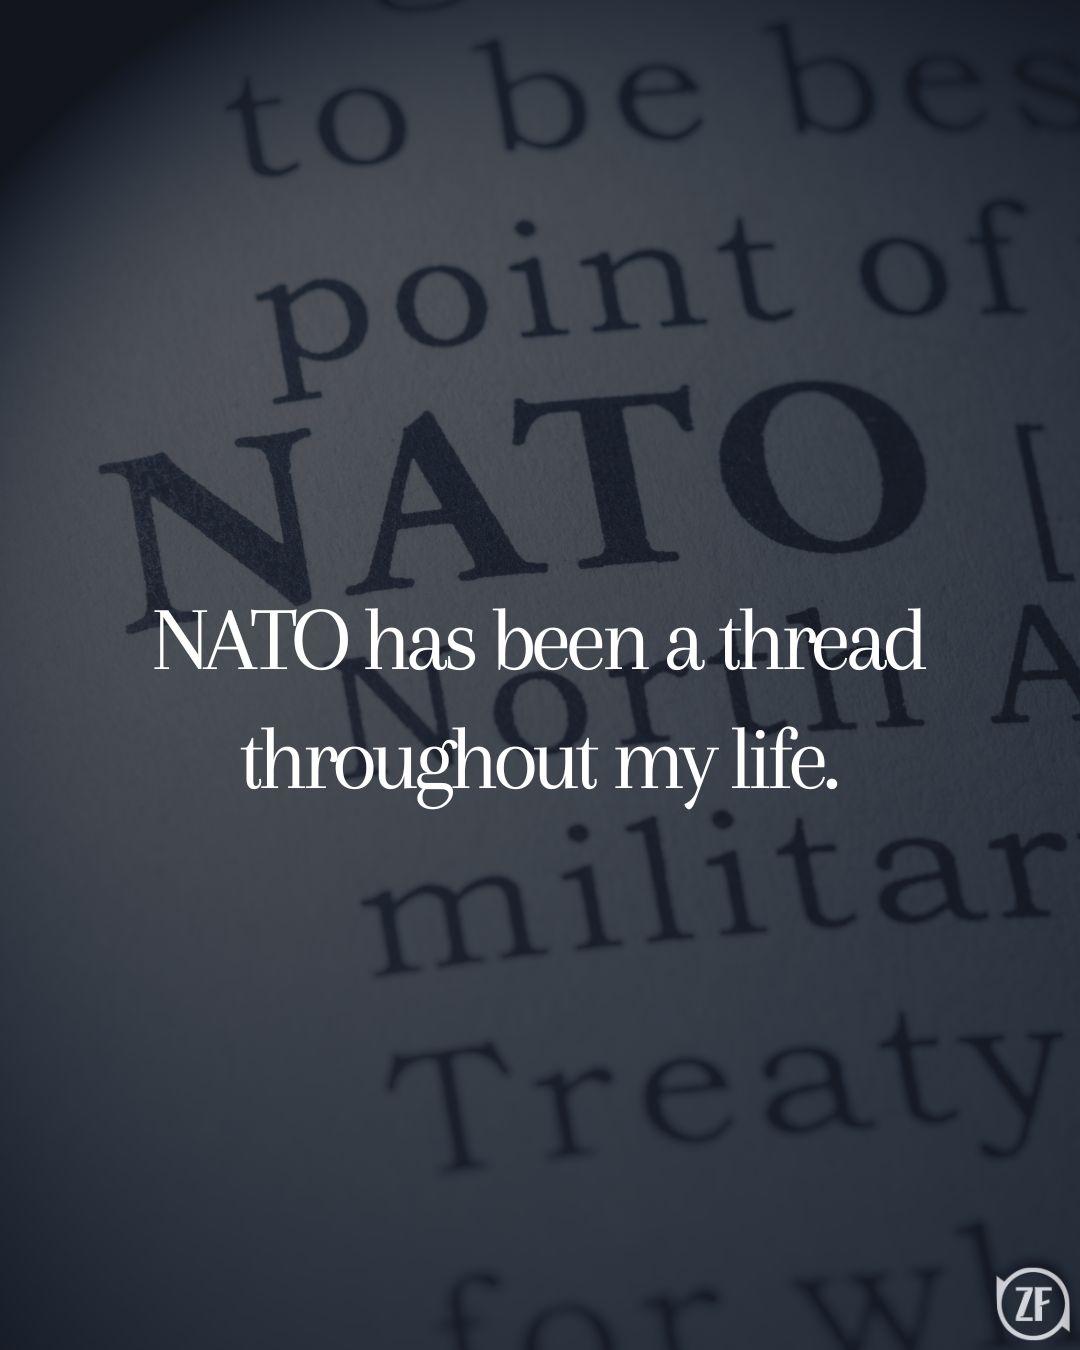 NATO has been a thread throughout my life.